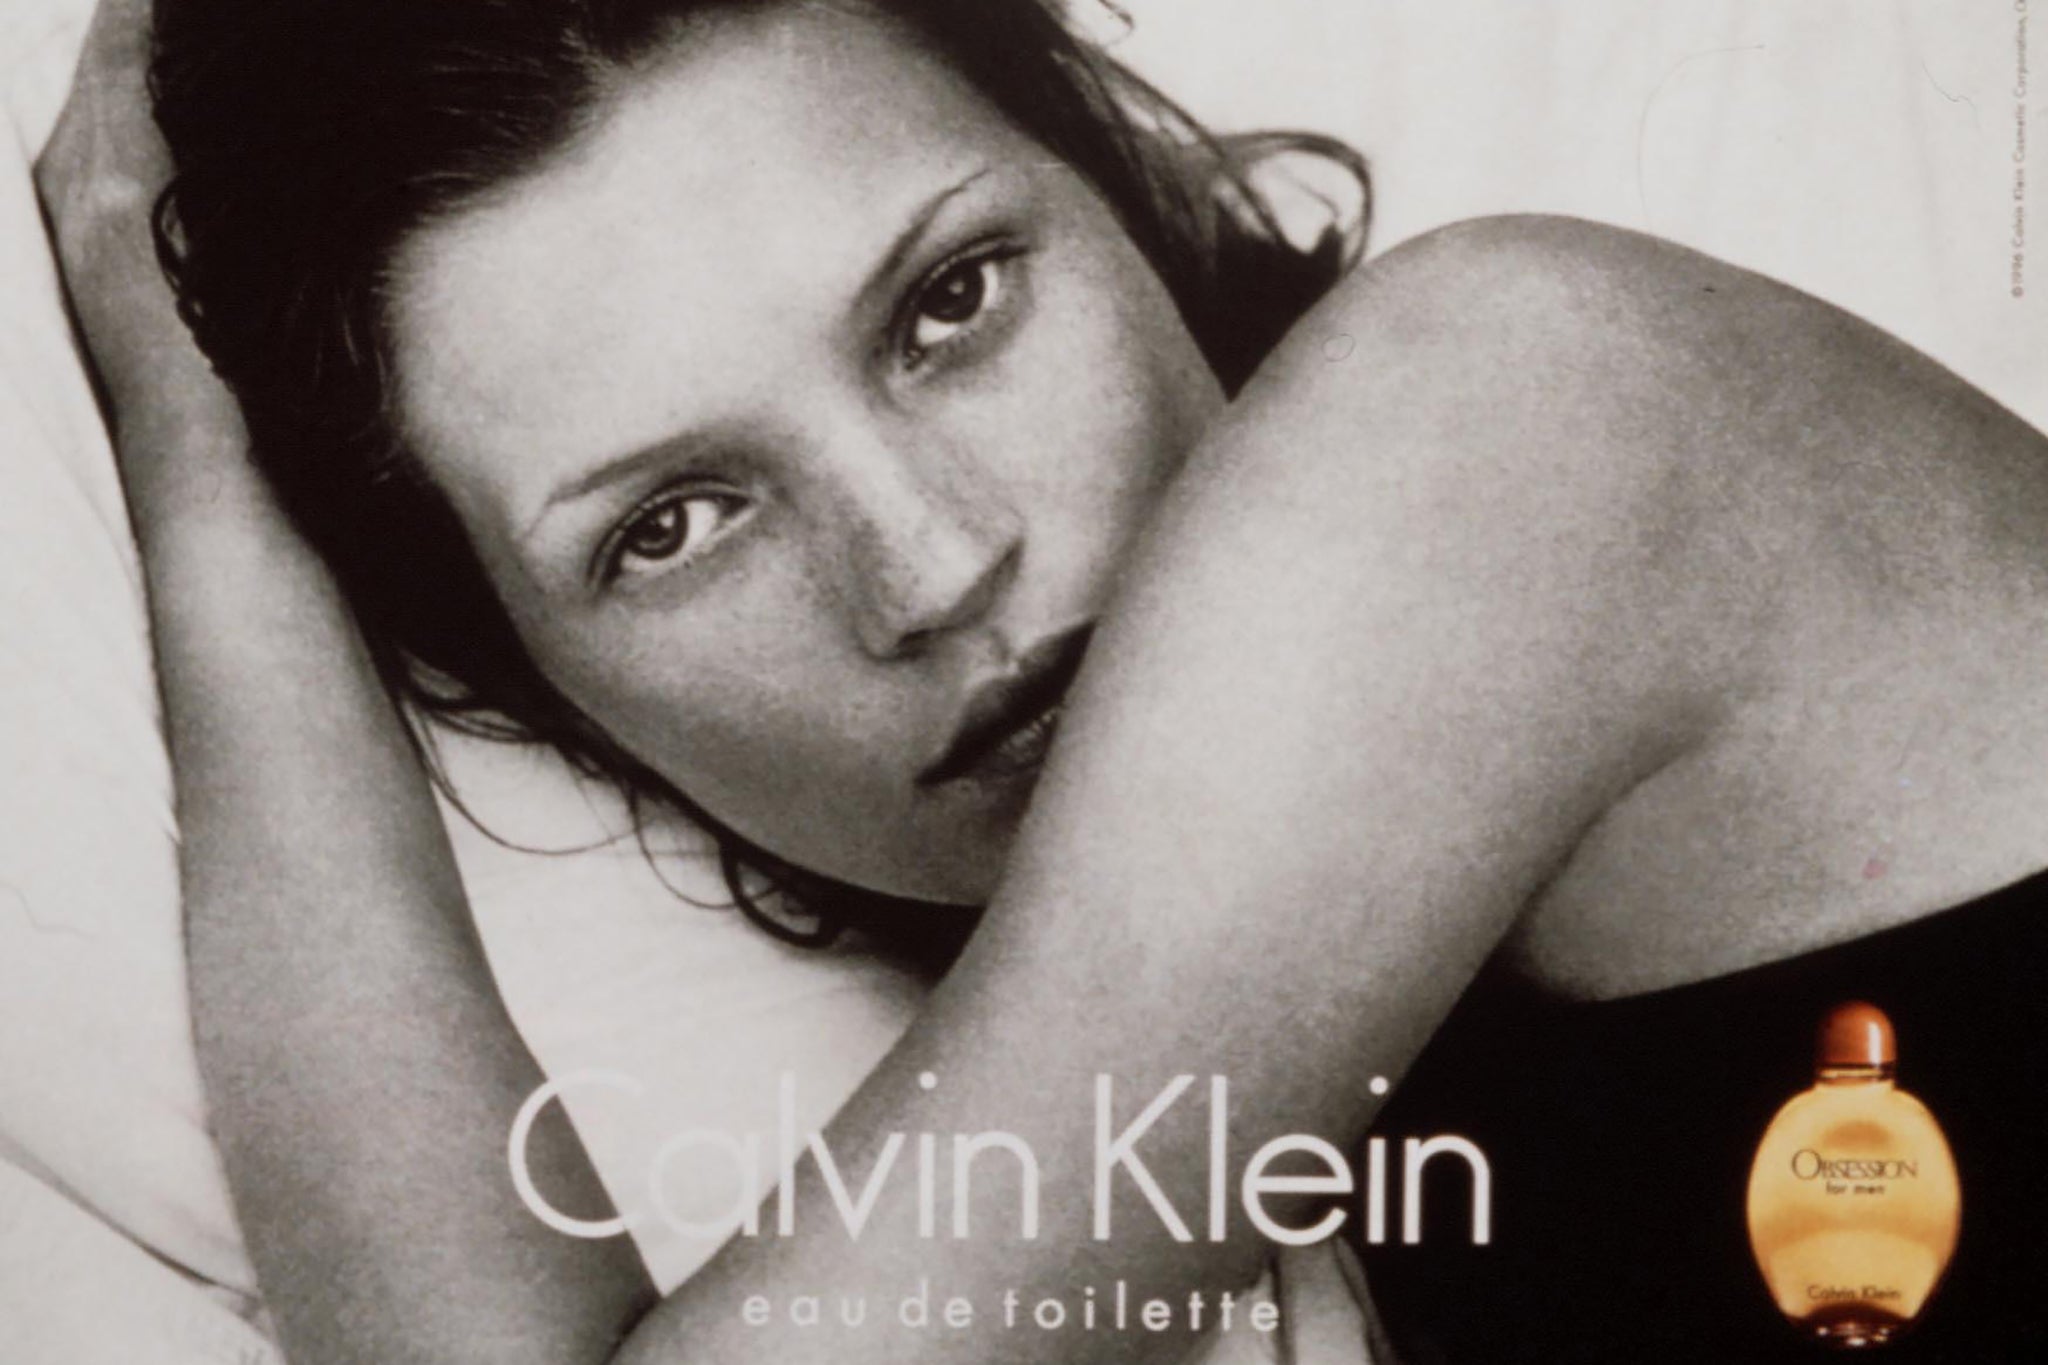 Calvin Klein New Deal With It Campaign, Photos and Video